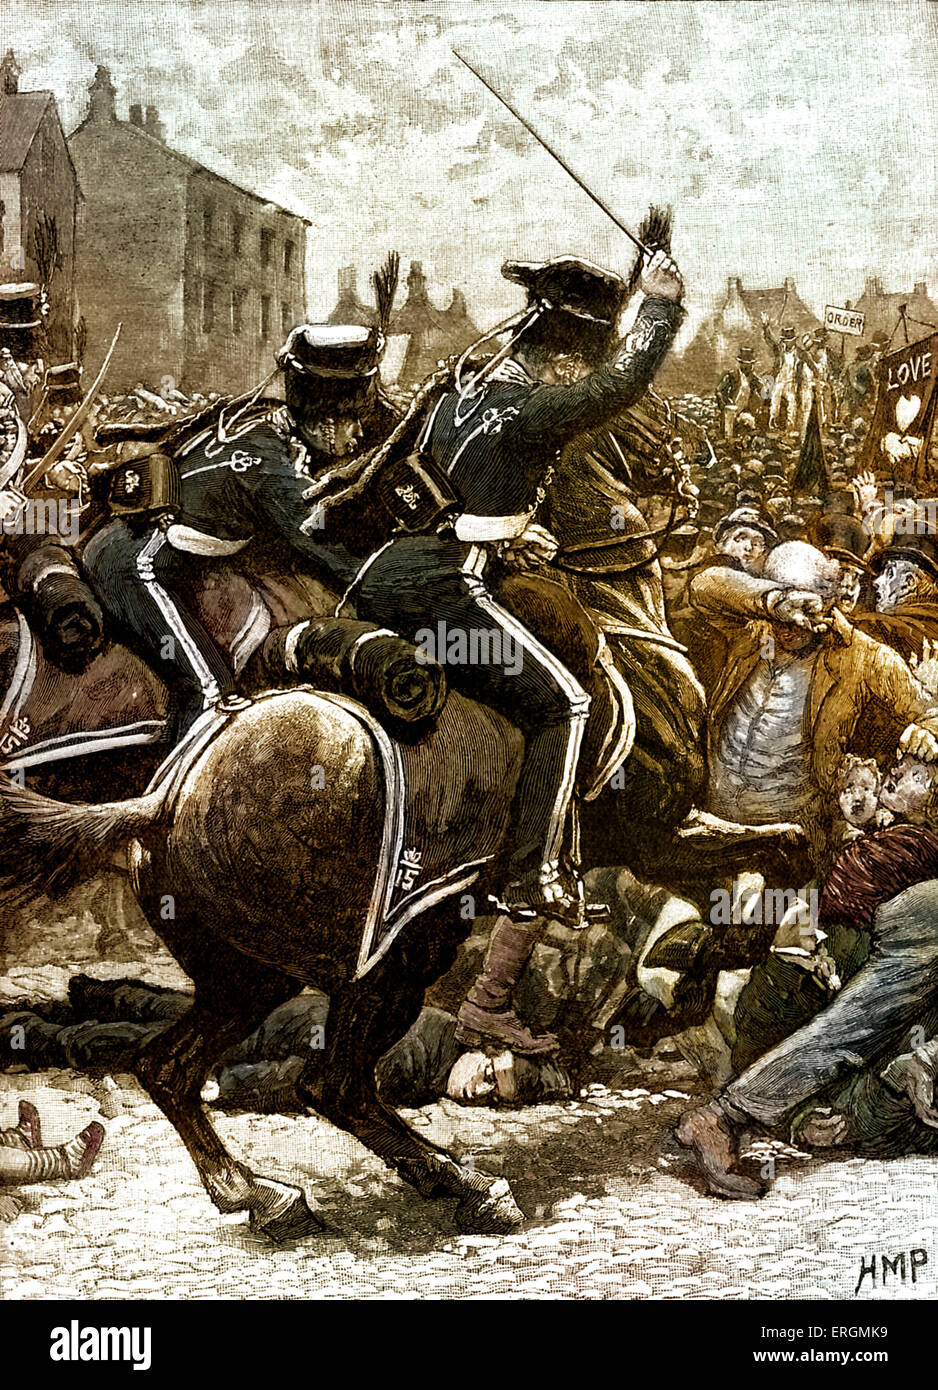 Peterloo Massacre, St Peter's Field, Manchester, UK 16 August 1819. Cavalry charged at a crowd who had gathered to demand reform of parliamentary represenation. Stock Photo